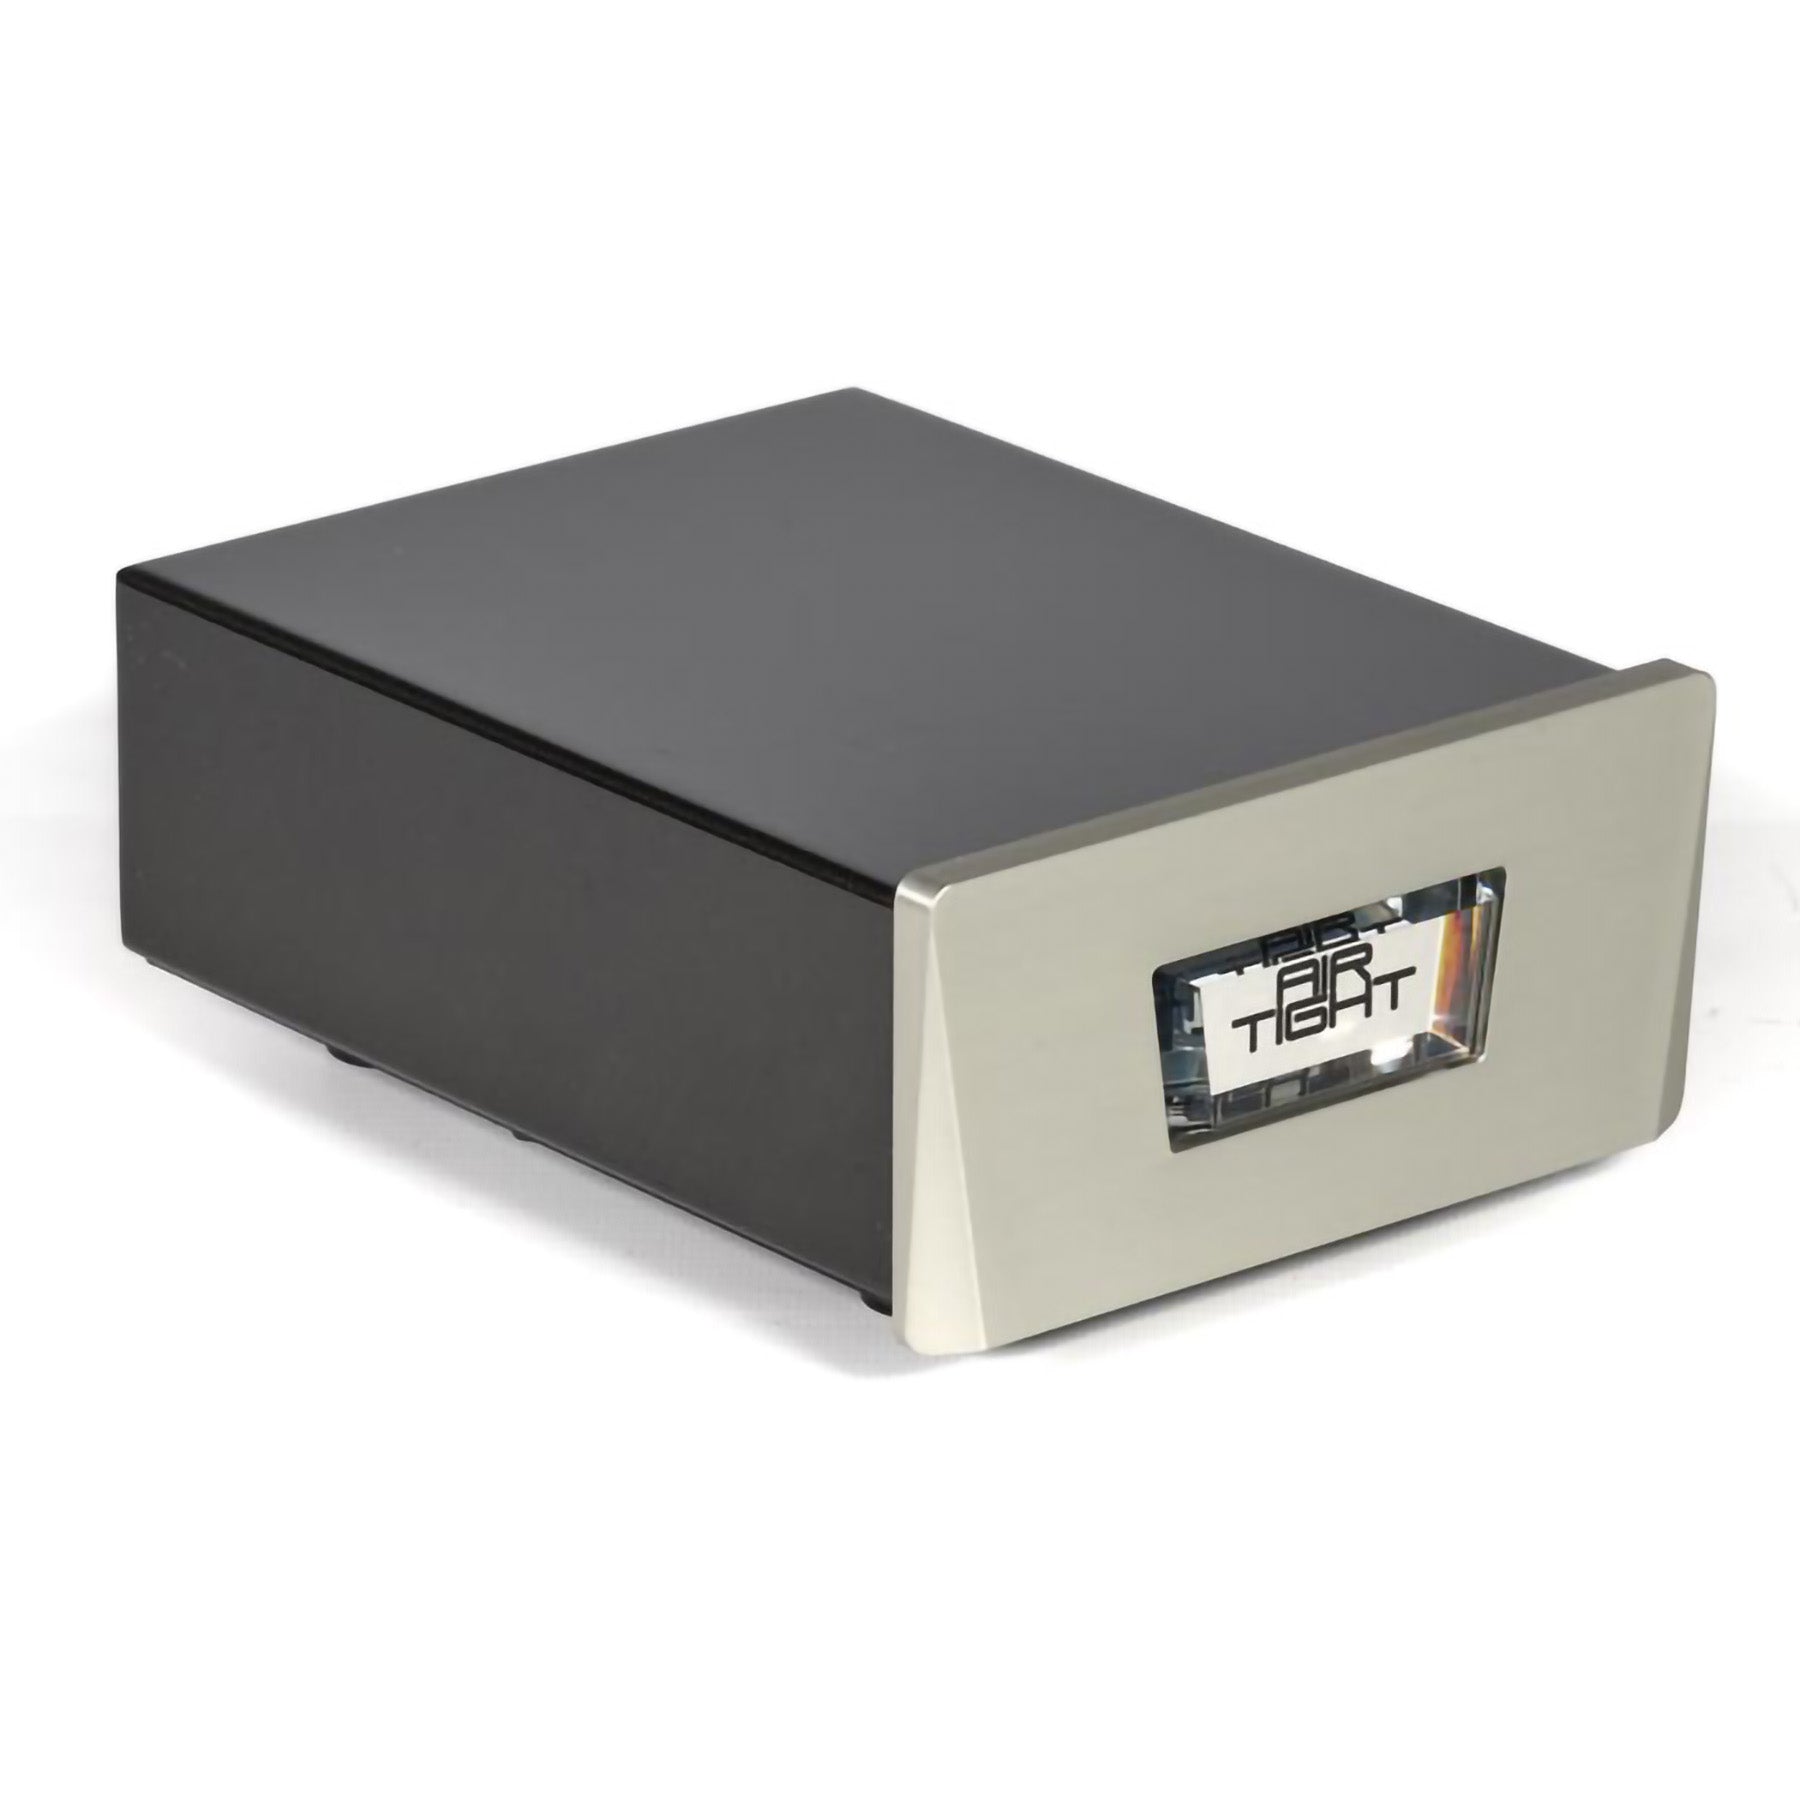 Air Tight ATH-3 MC Step-Up Transformer (with In/Out GND SW)